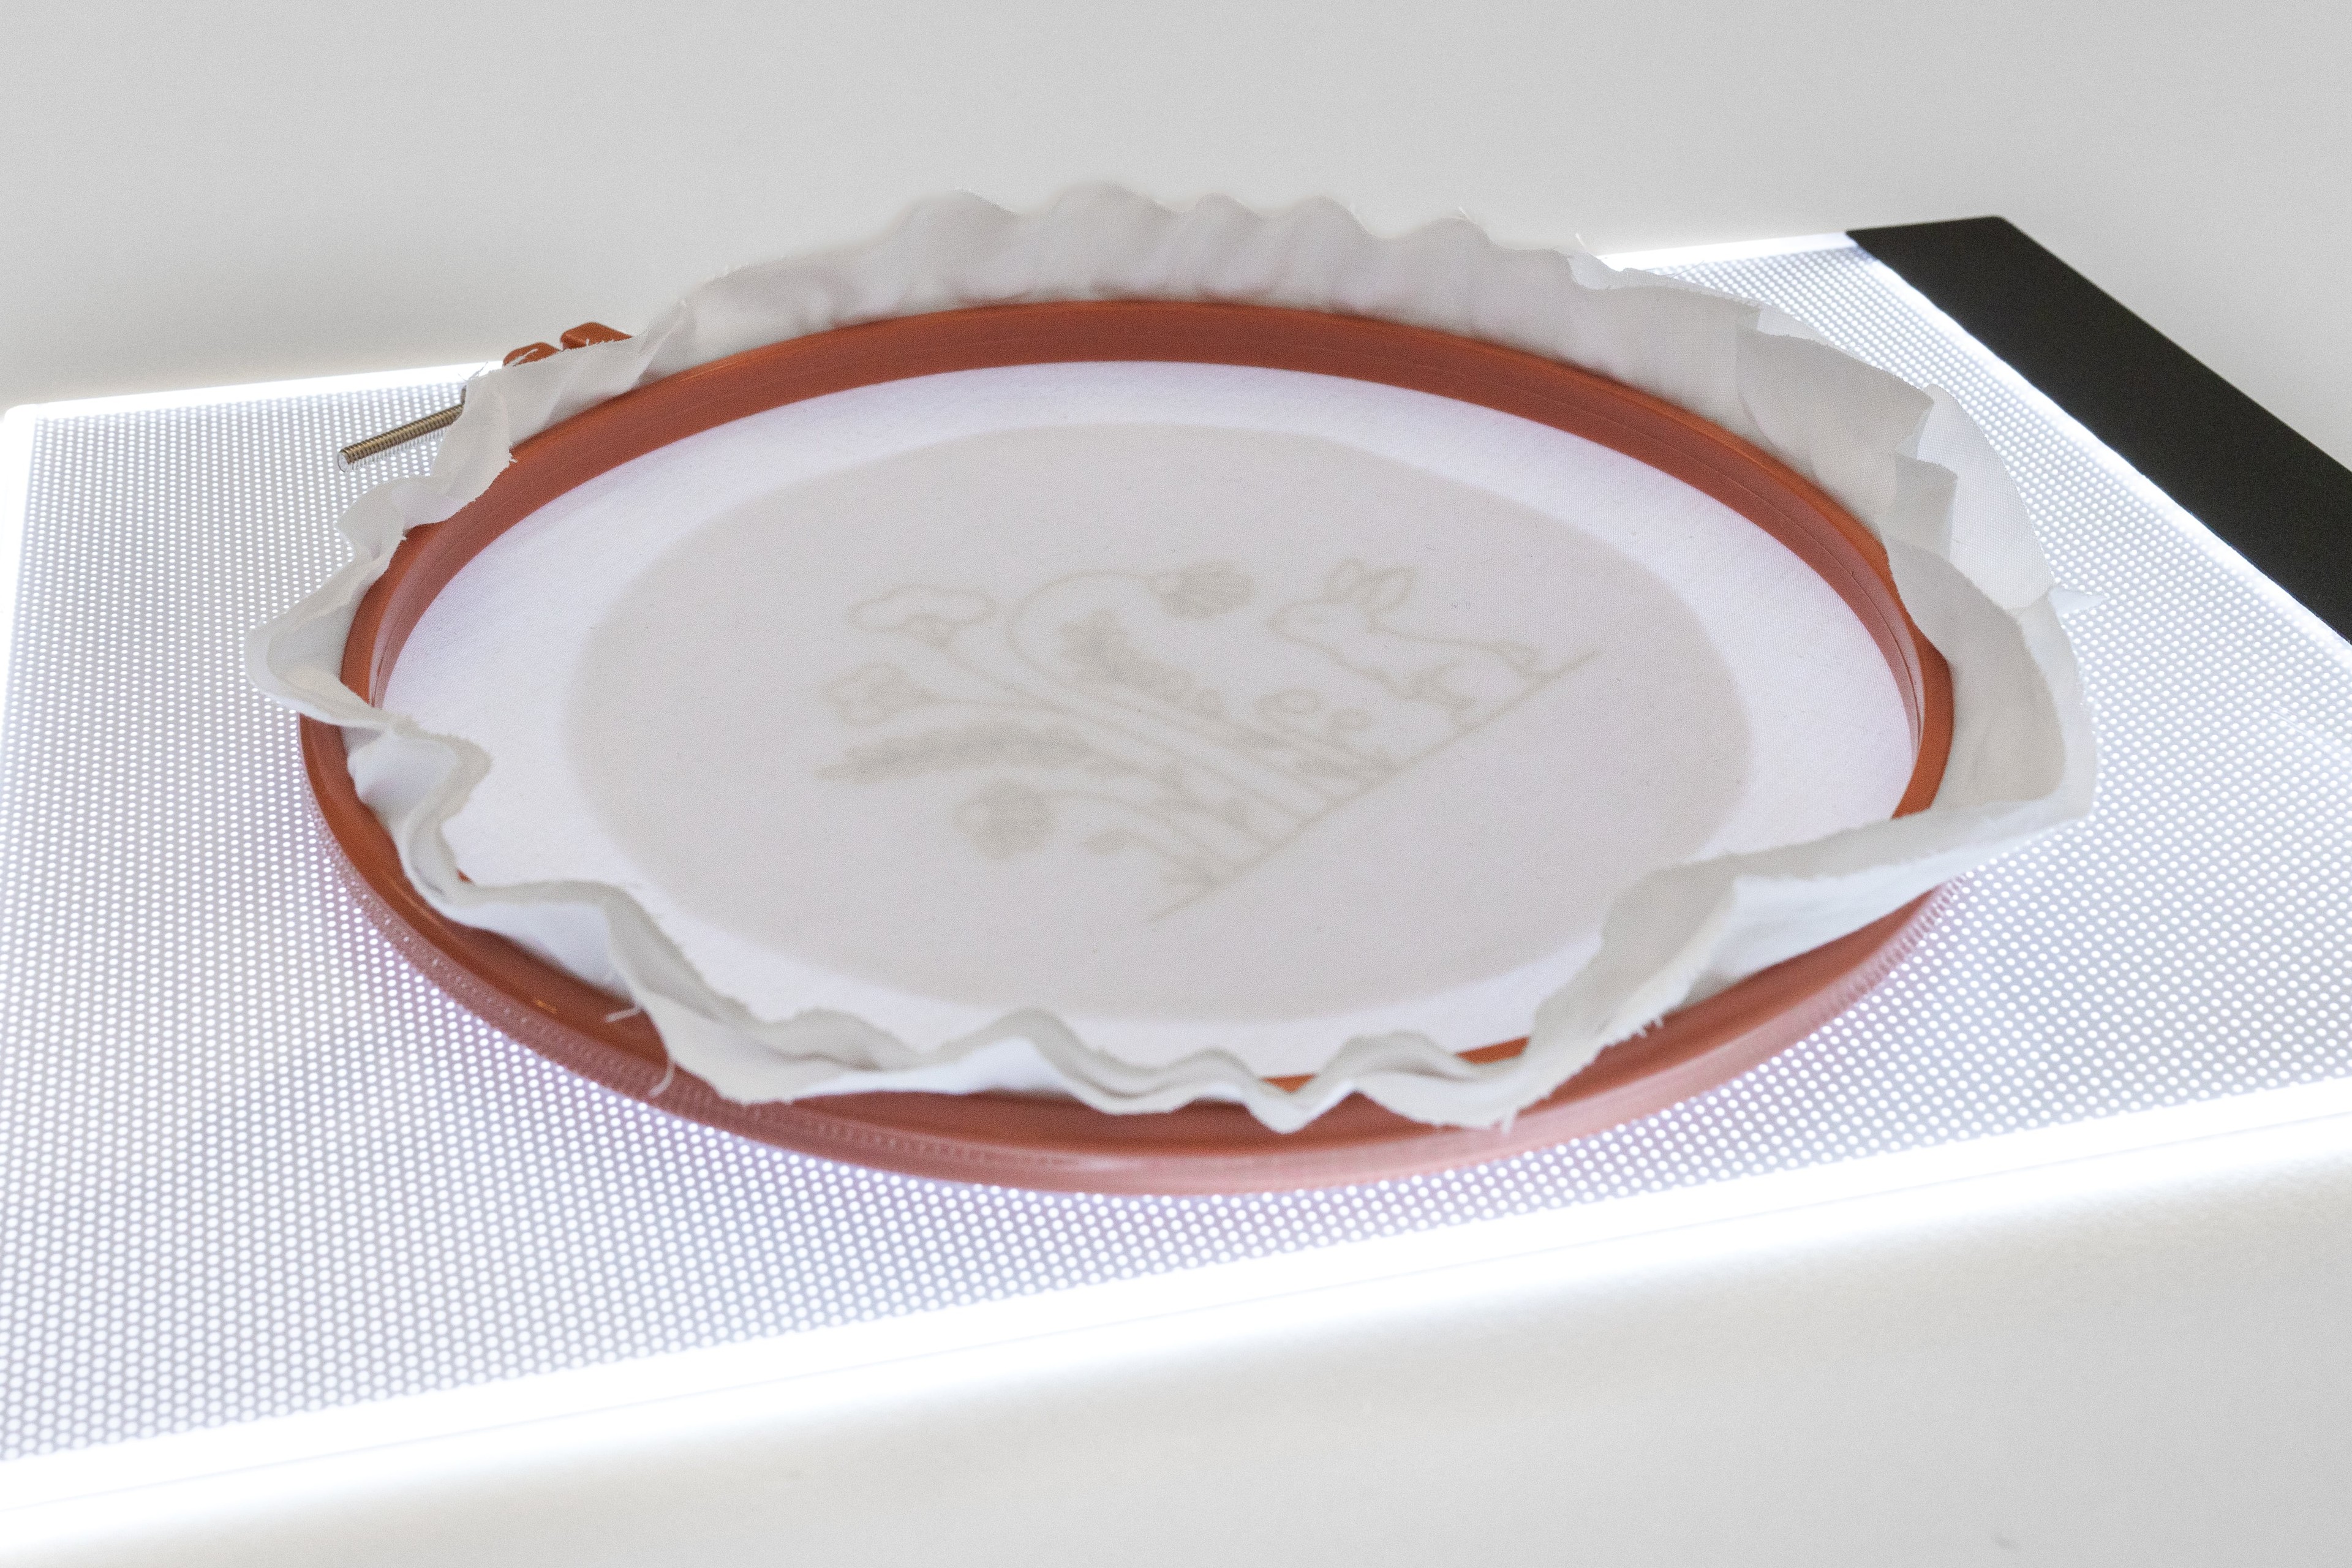 A hoop with a pattern drawn on it and fabric overtop lies on a lightbox.